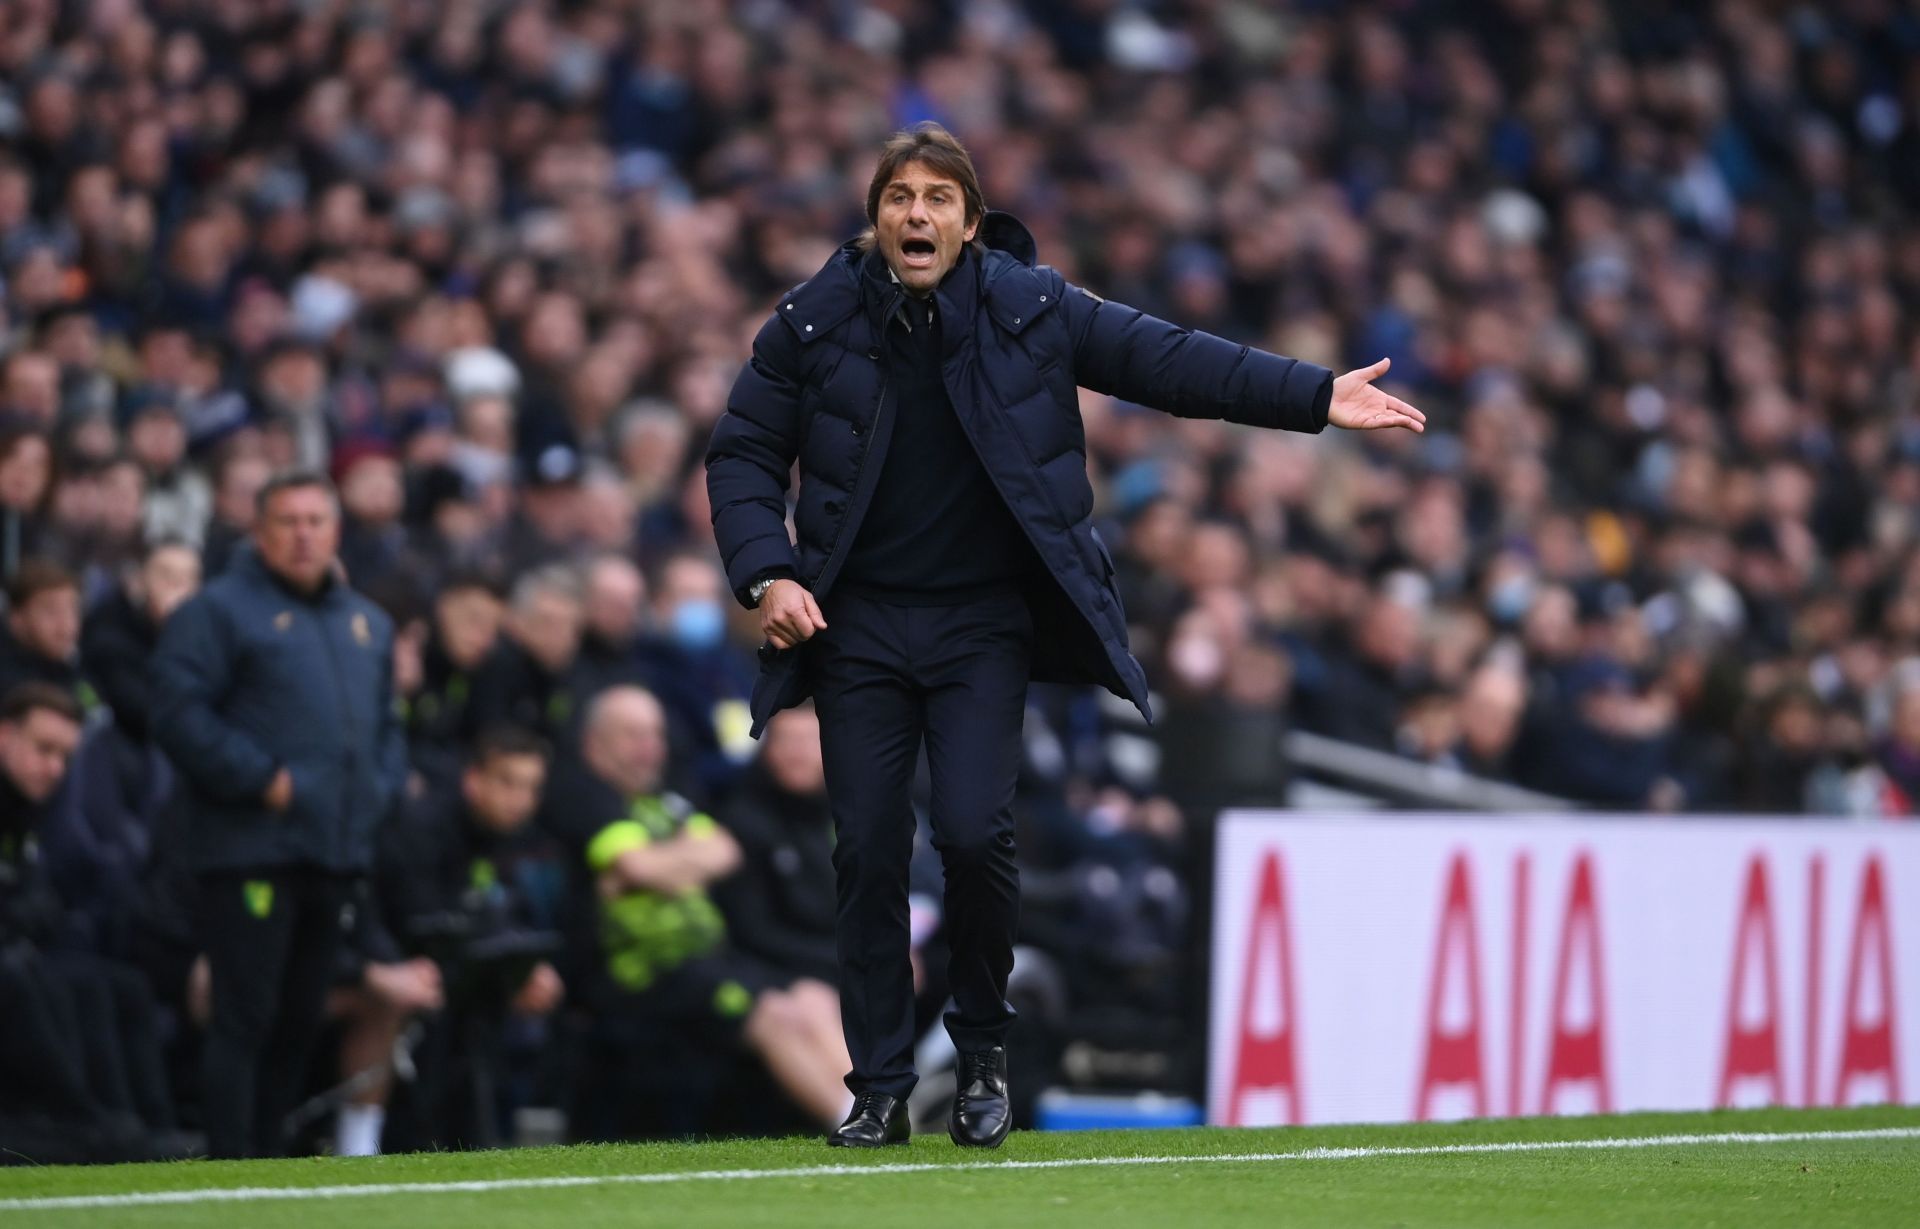 Conte is one of the most successful managers right now